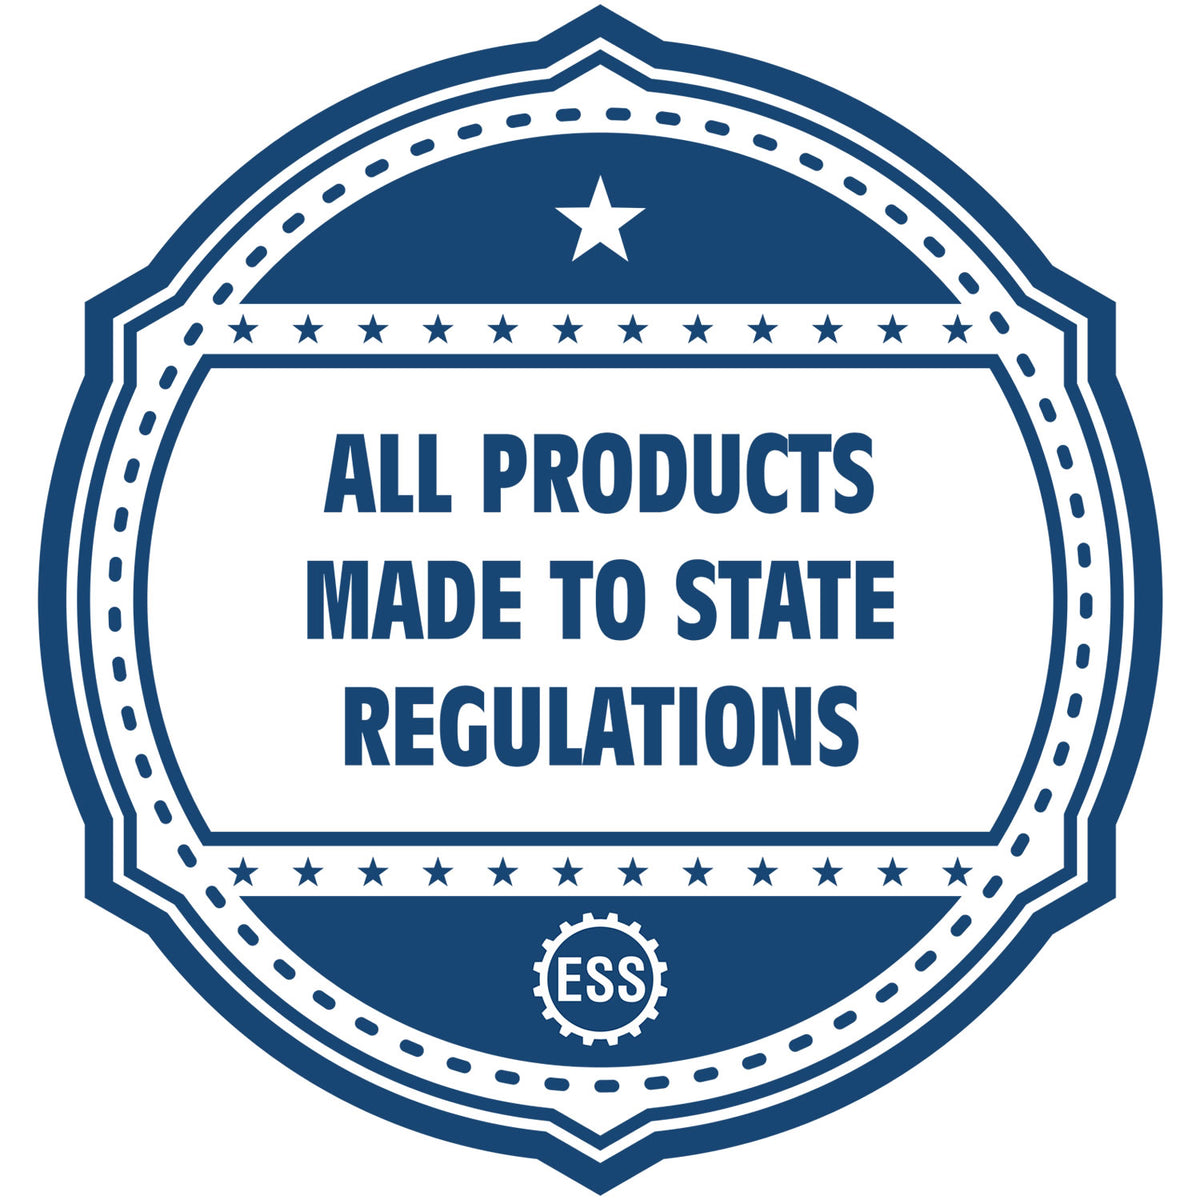 An icon or badge element for the Wooden Handle Indiana Rectangular Notary Public Stamp showing that this product is made in compliance with state regulations.